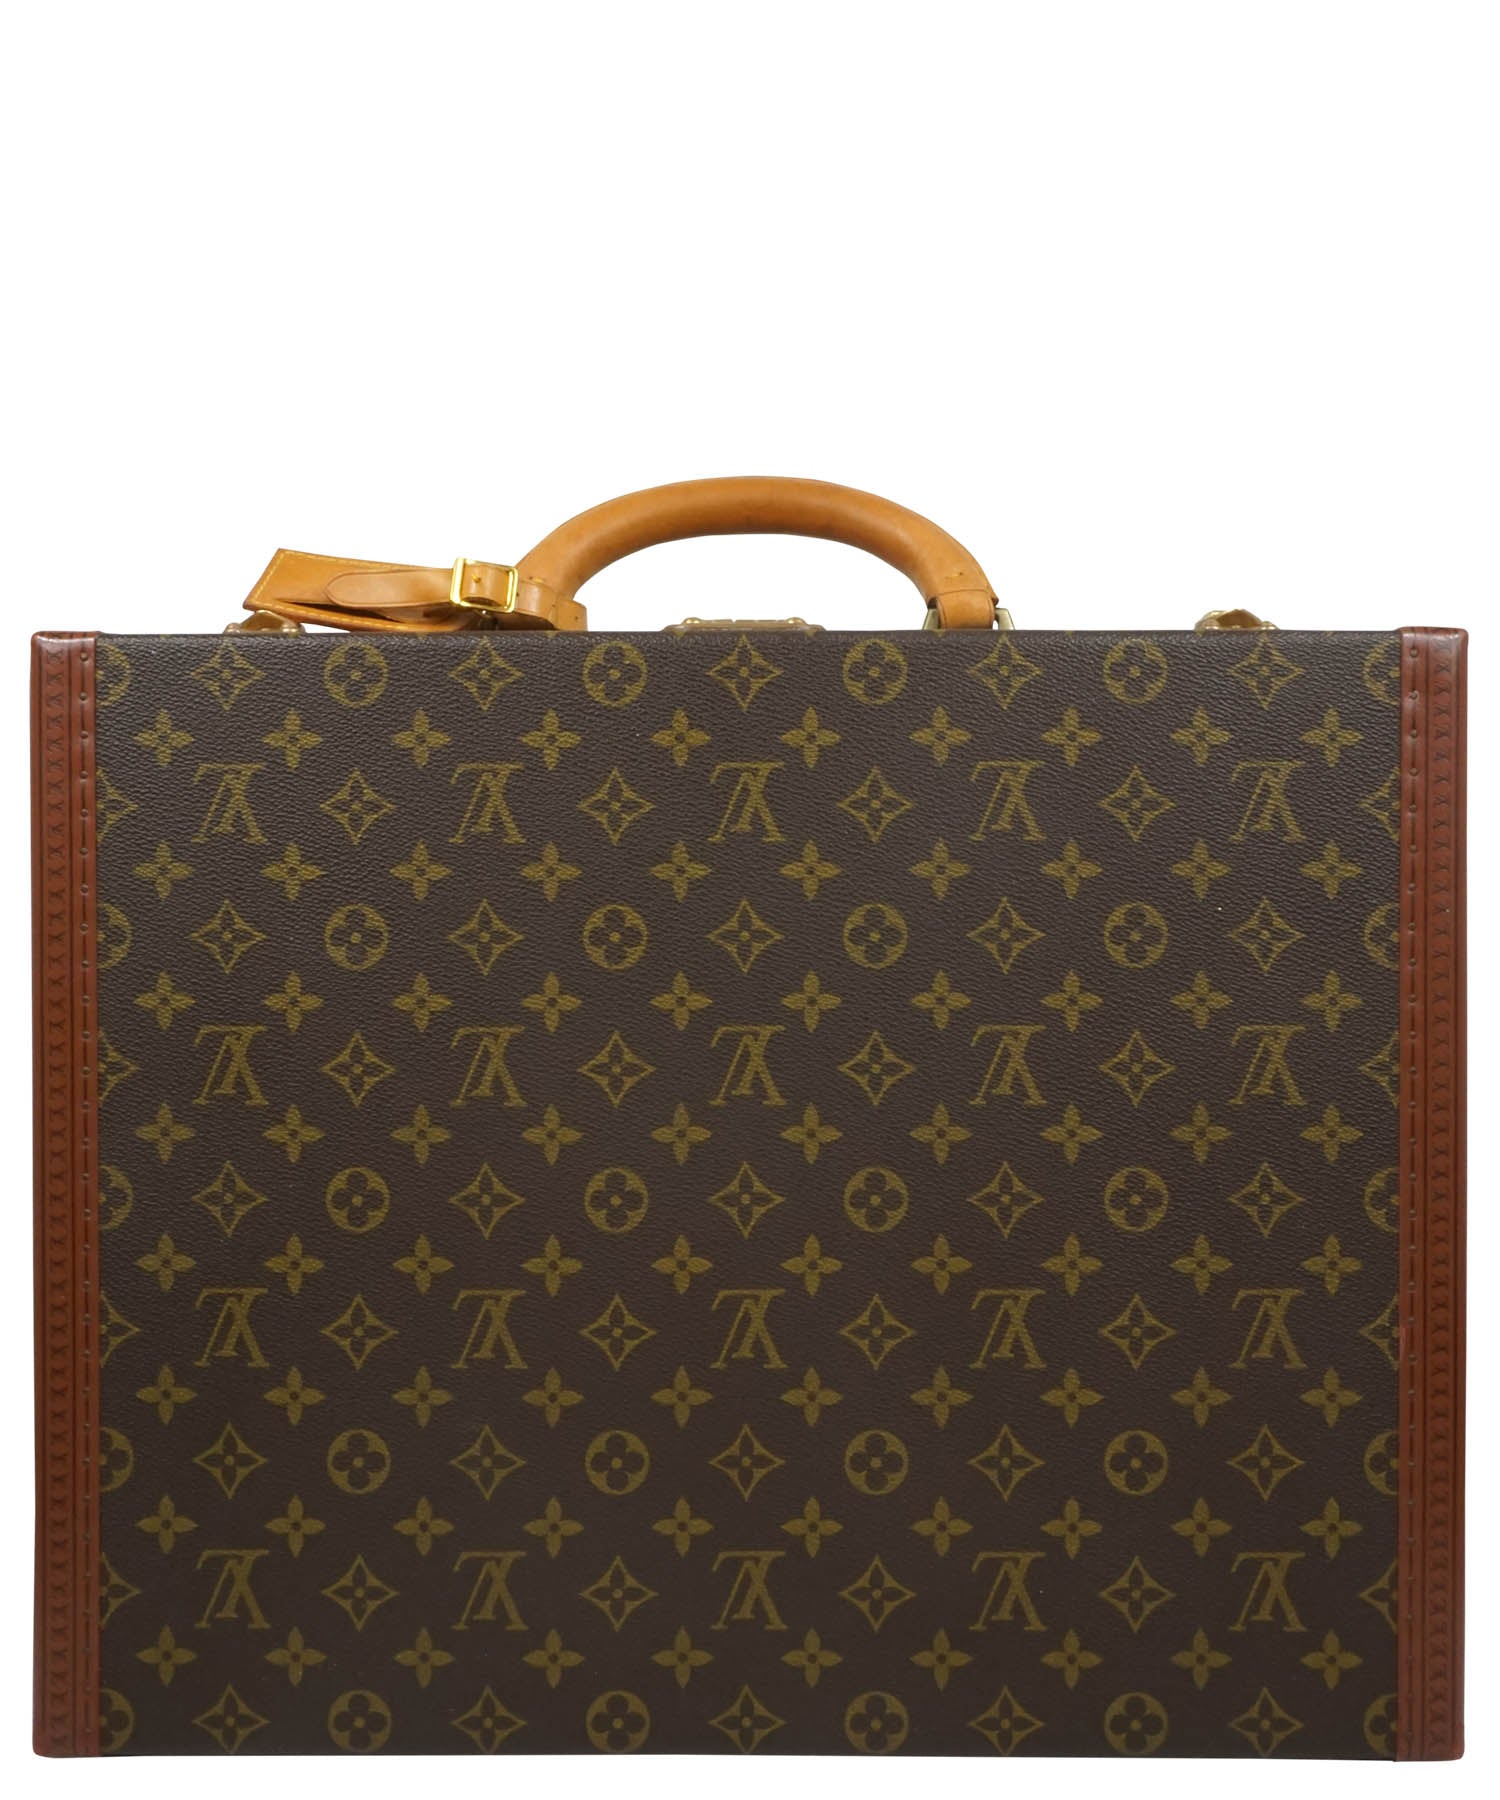 Louis Vuitton design Hand - By Silvy #bysilvyhandpainted